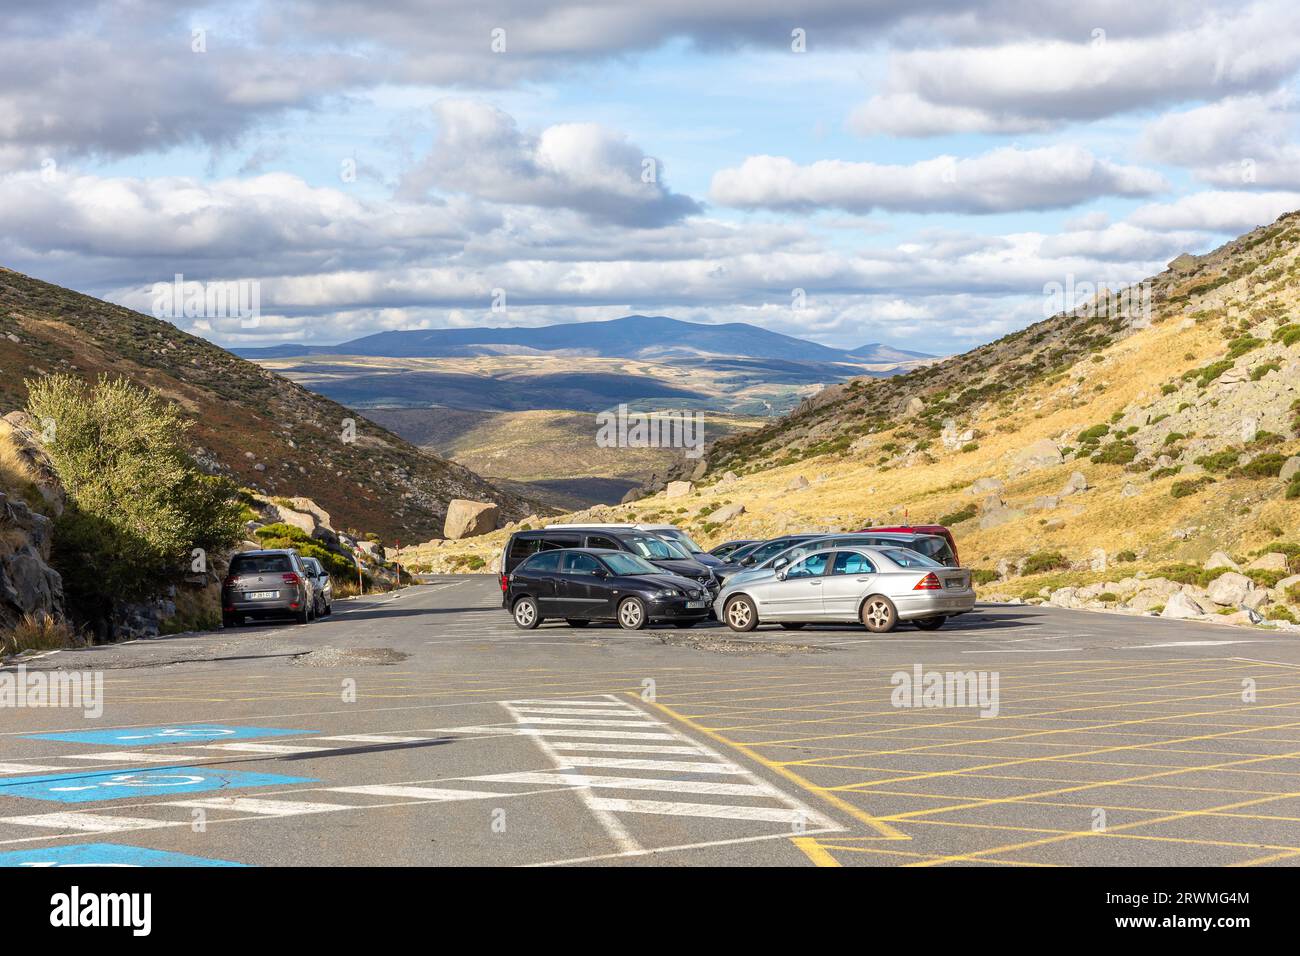 Sierra de Gredos, Spain, 04.10.21. Plataforma de Gredos parking lot with cars and camper vans parked in front of the entrance to the Regional Park of Stock Photo